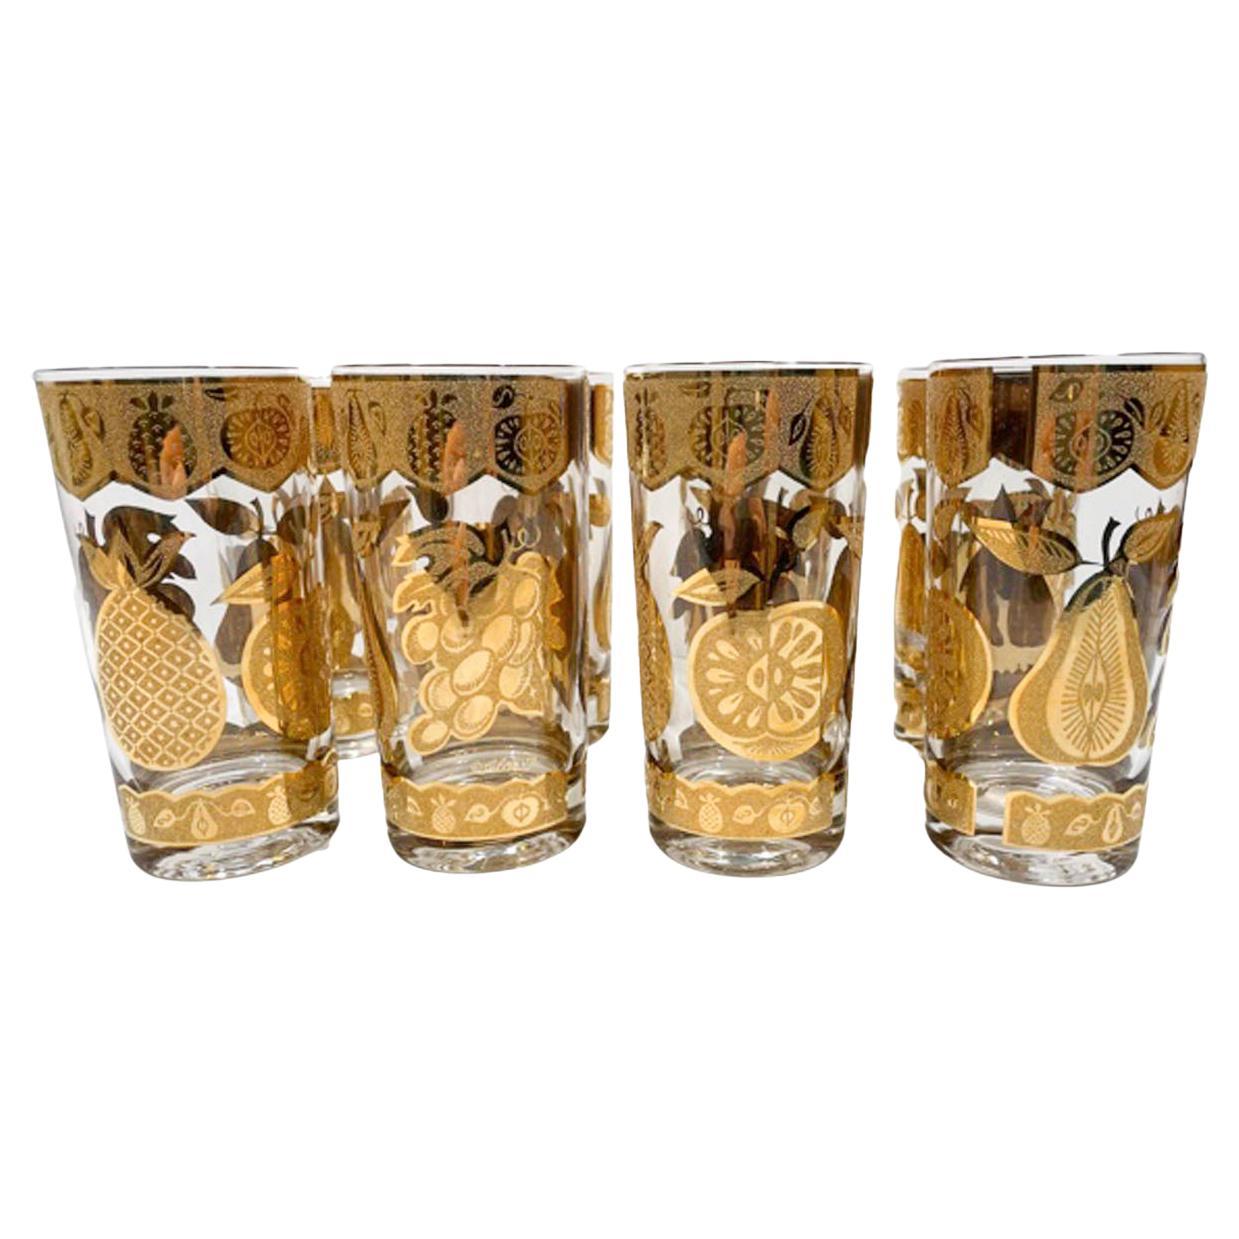 Set of 8 Vintage Highball Glasses by Culver in the Florentine Pattern